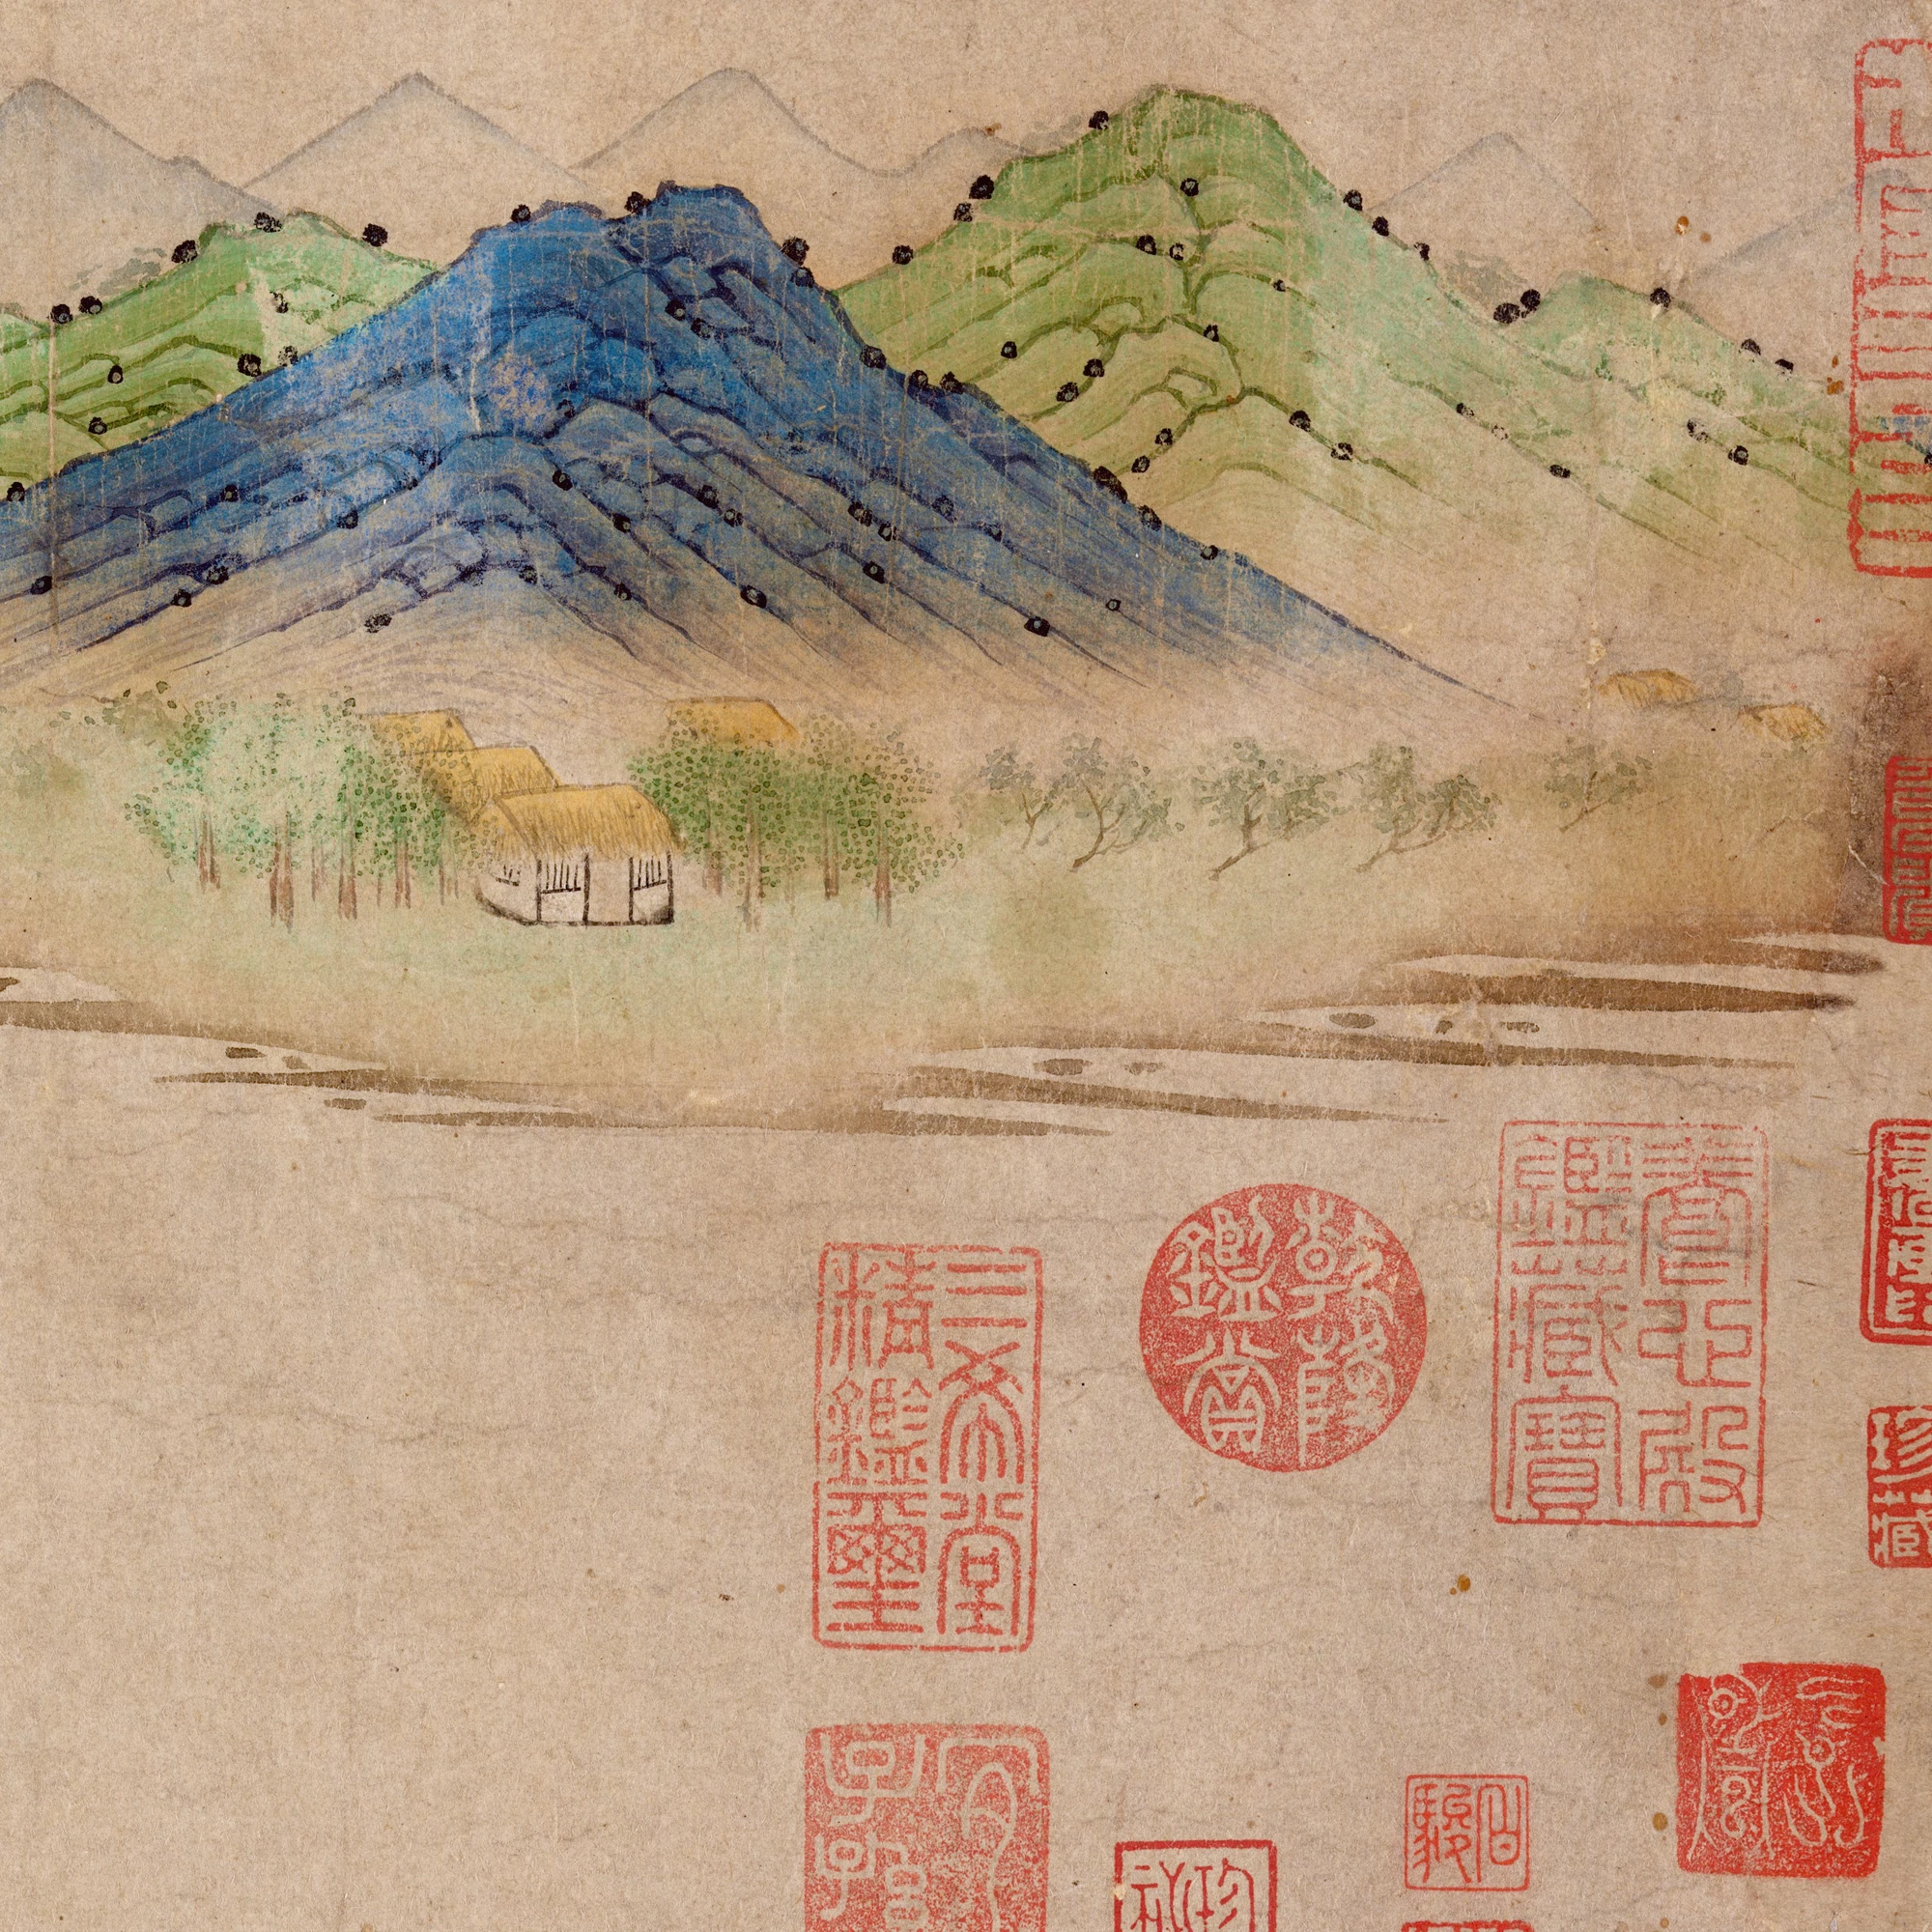 Yuan Dynasty, Middle Ages